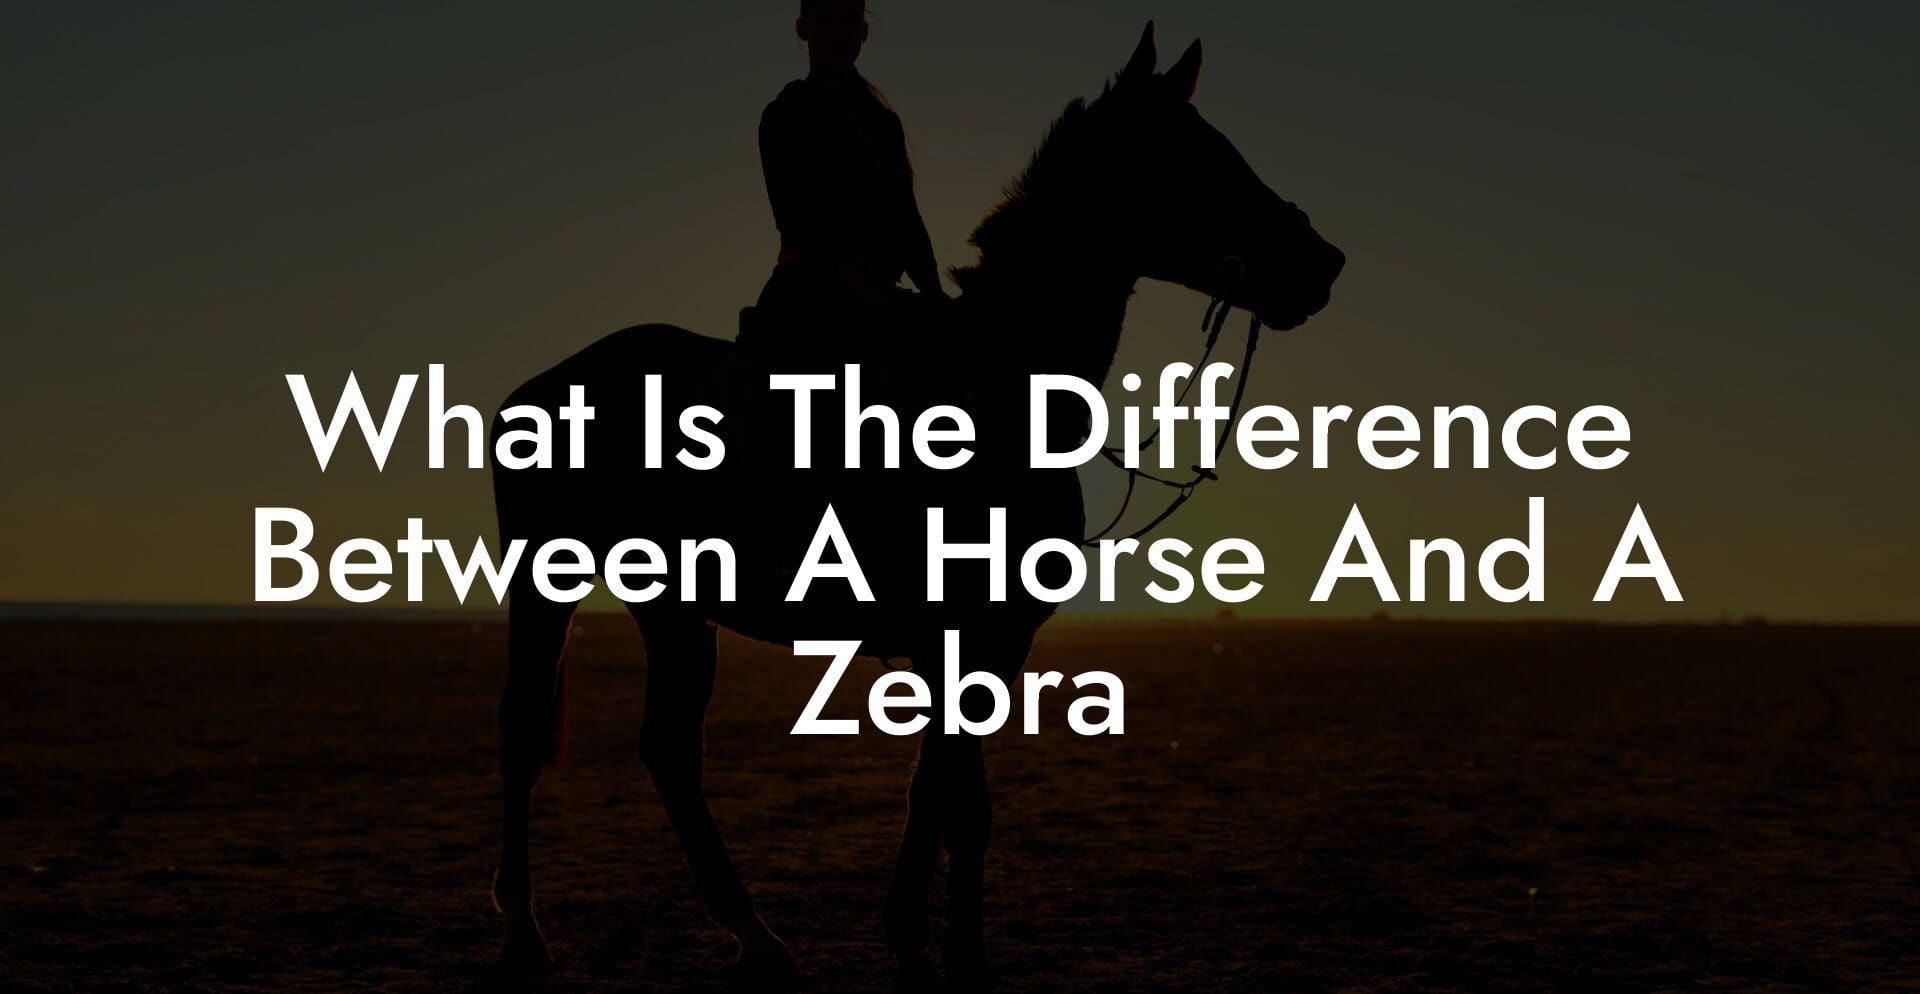 What Is The Difference Between A Horse And A Zebra